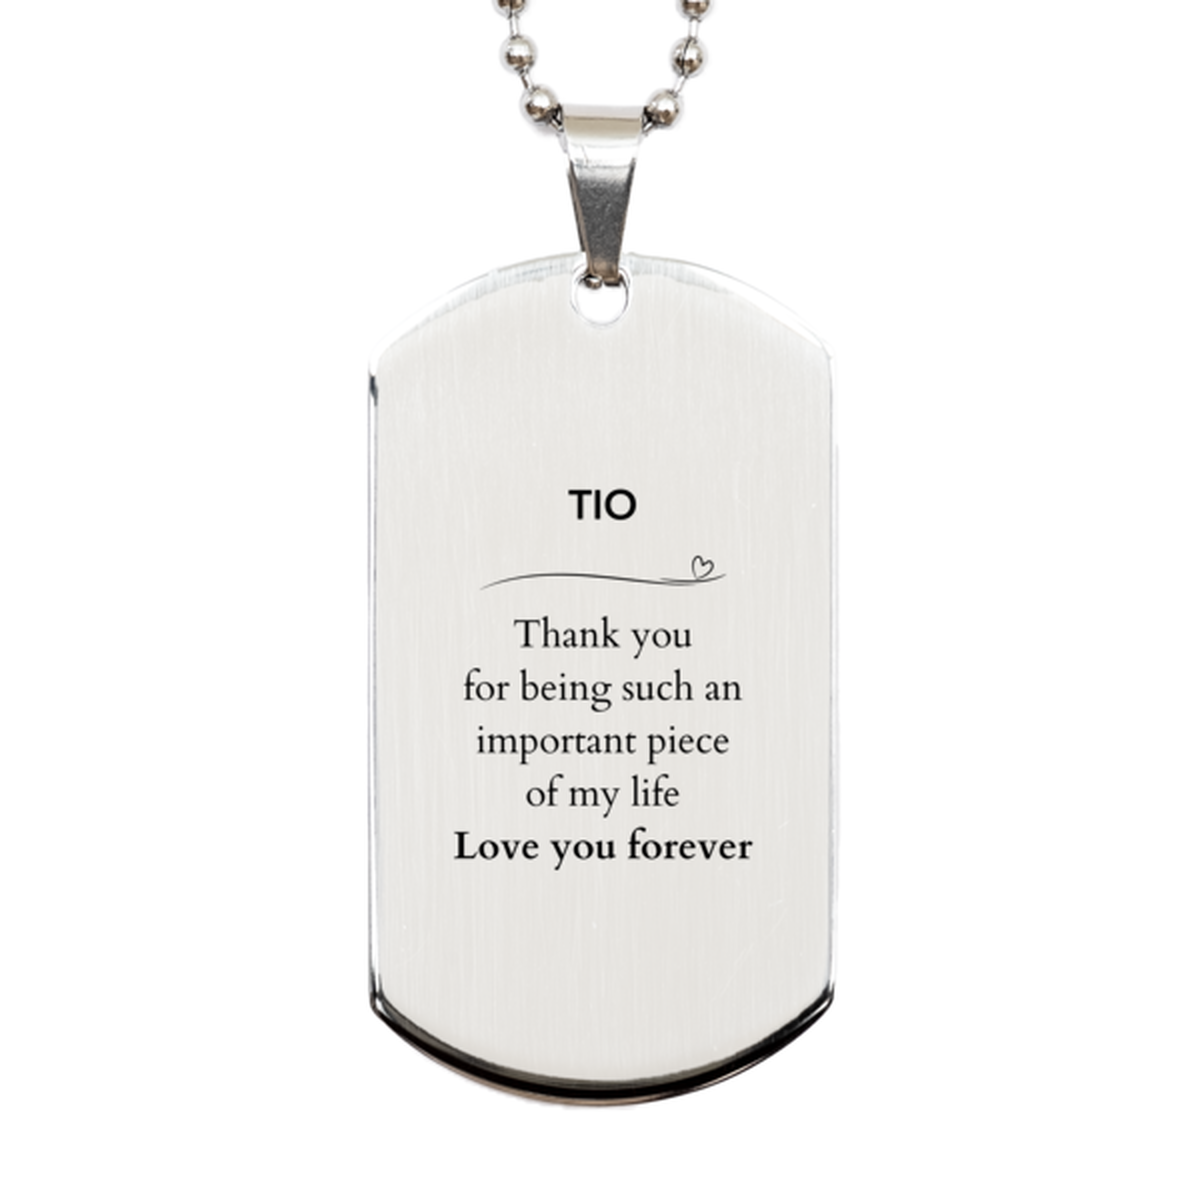 Appropriate Tio Silver Dog Tag Epic Birthday Gifts for Tio Thank you for being such an important piece of my life Tio Christmas Mothers Fathers Day